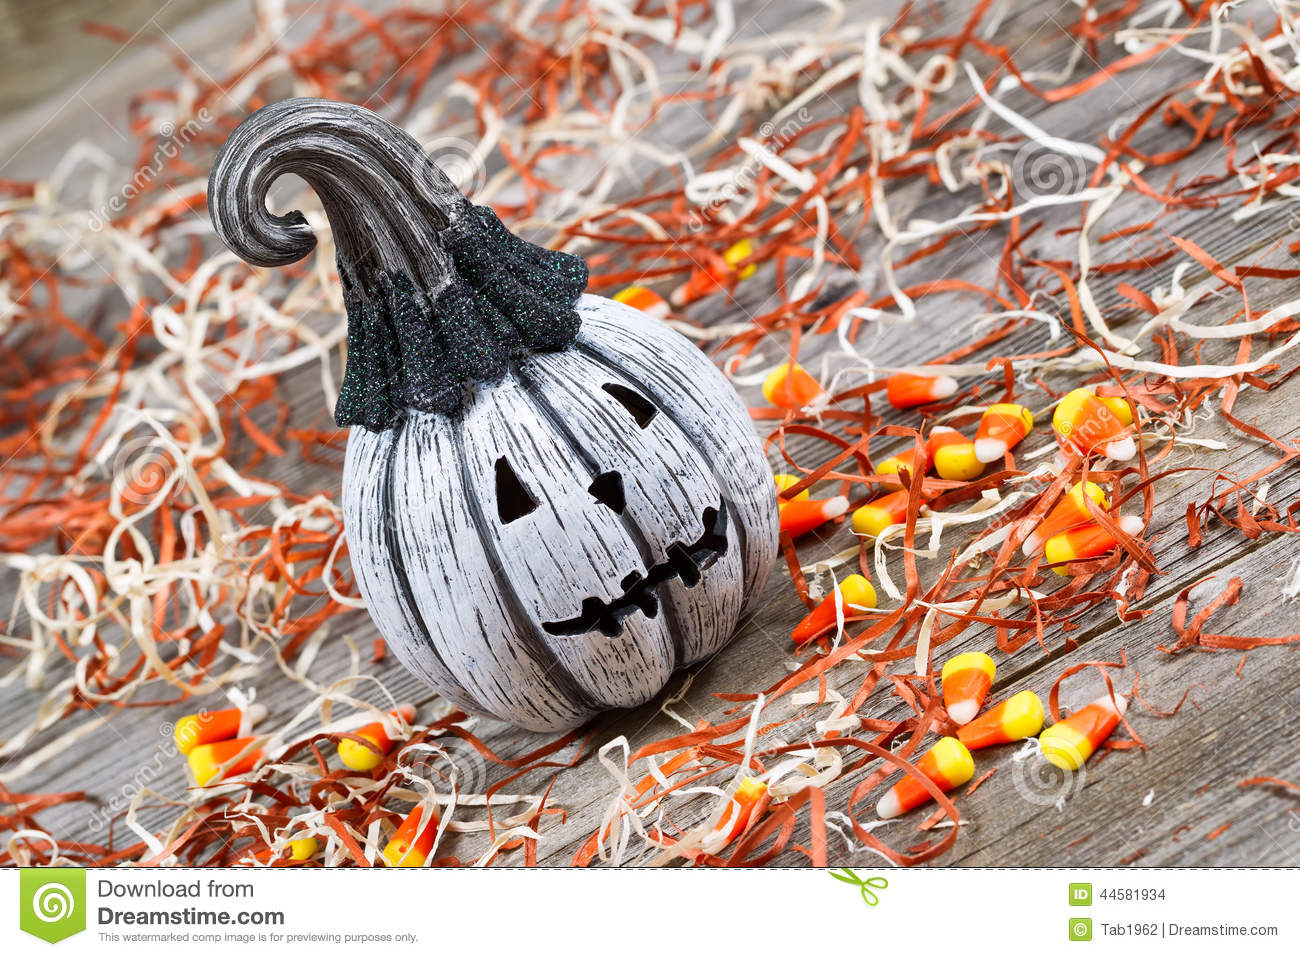     Black And White Pumpkin Surround By Shredded Paper Candy And Rustic